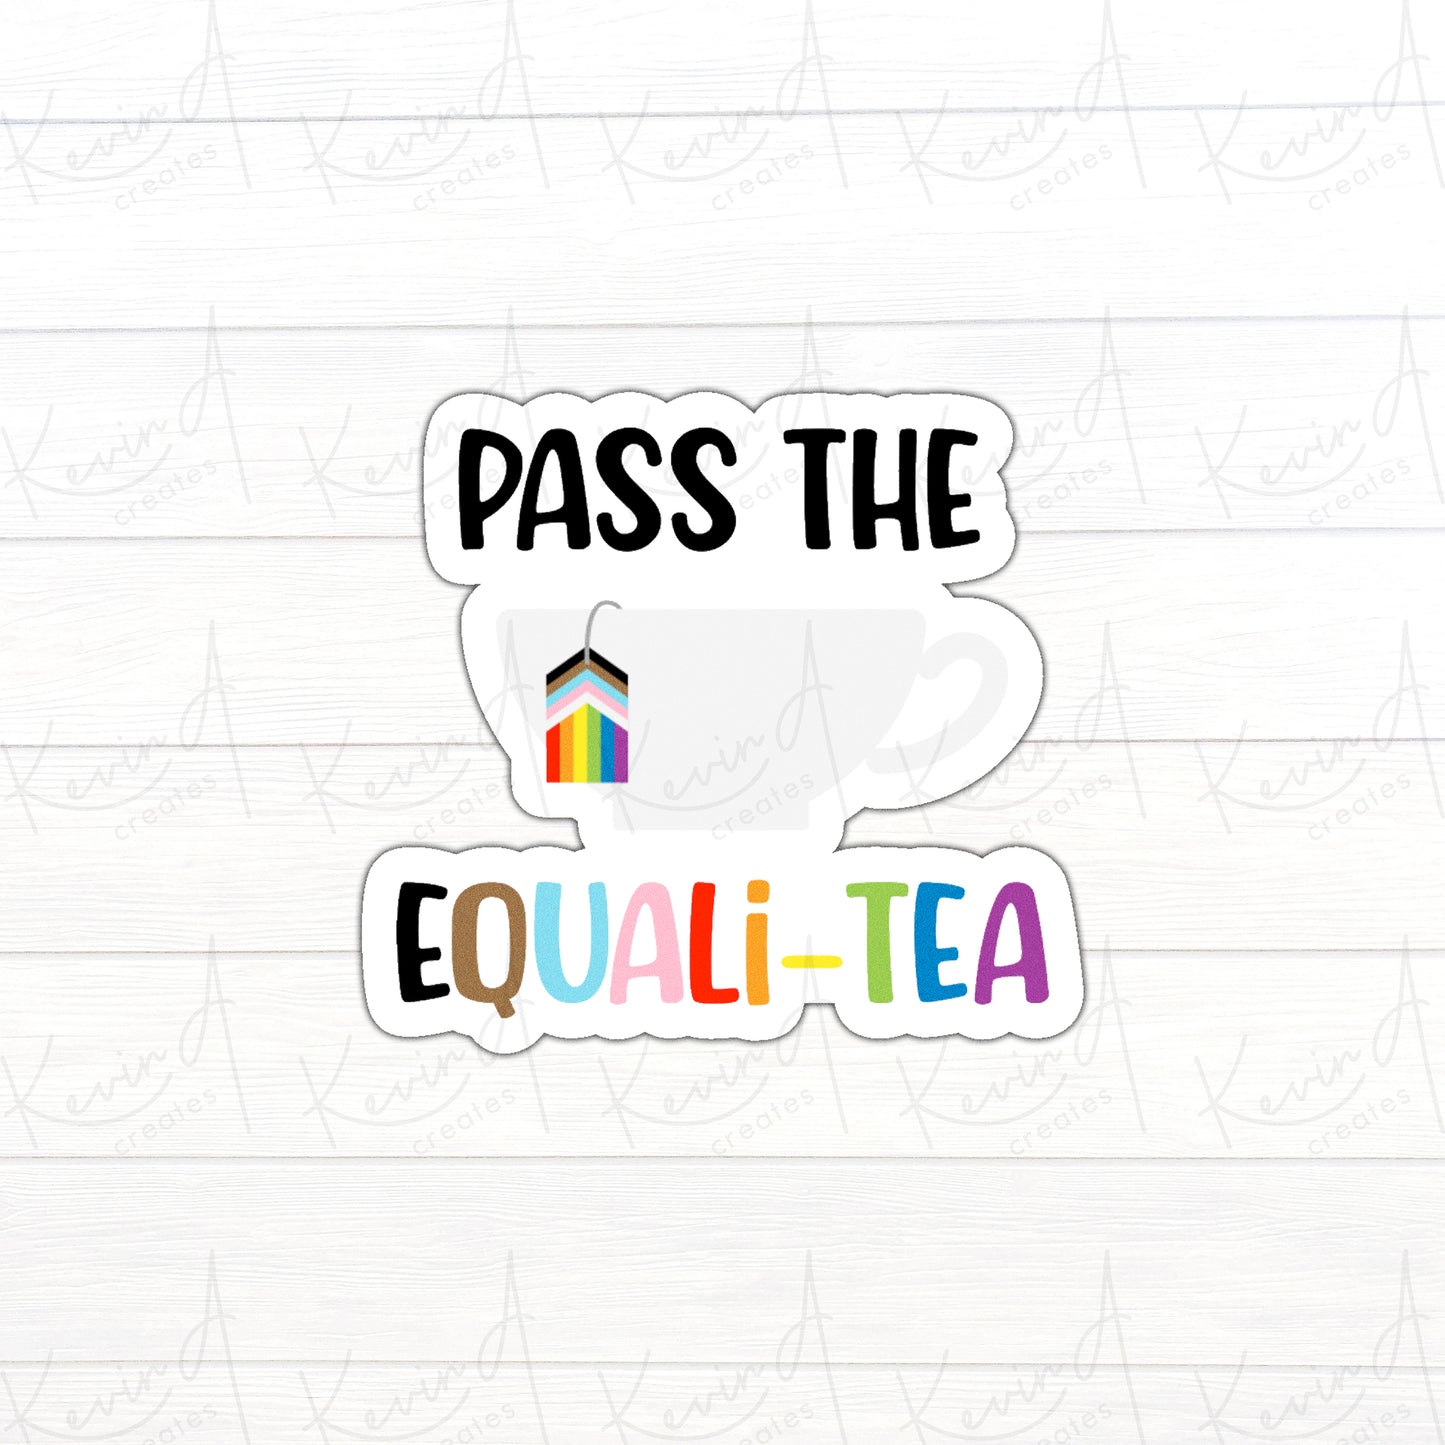 DC-021, "Pass the Equali-Tea" Equality Pride Die Cut Stickers